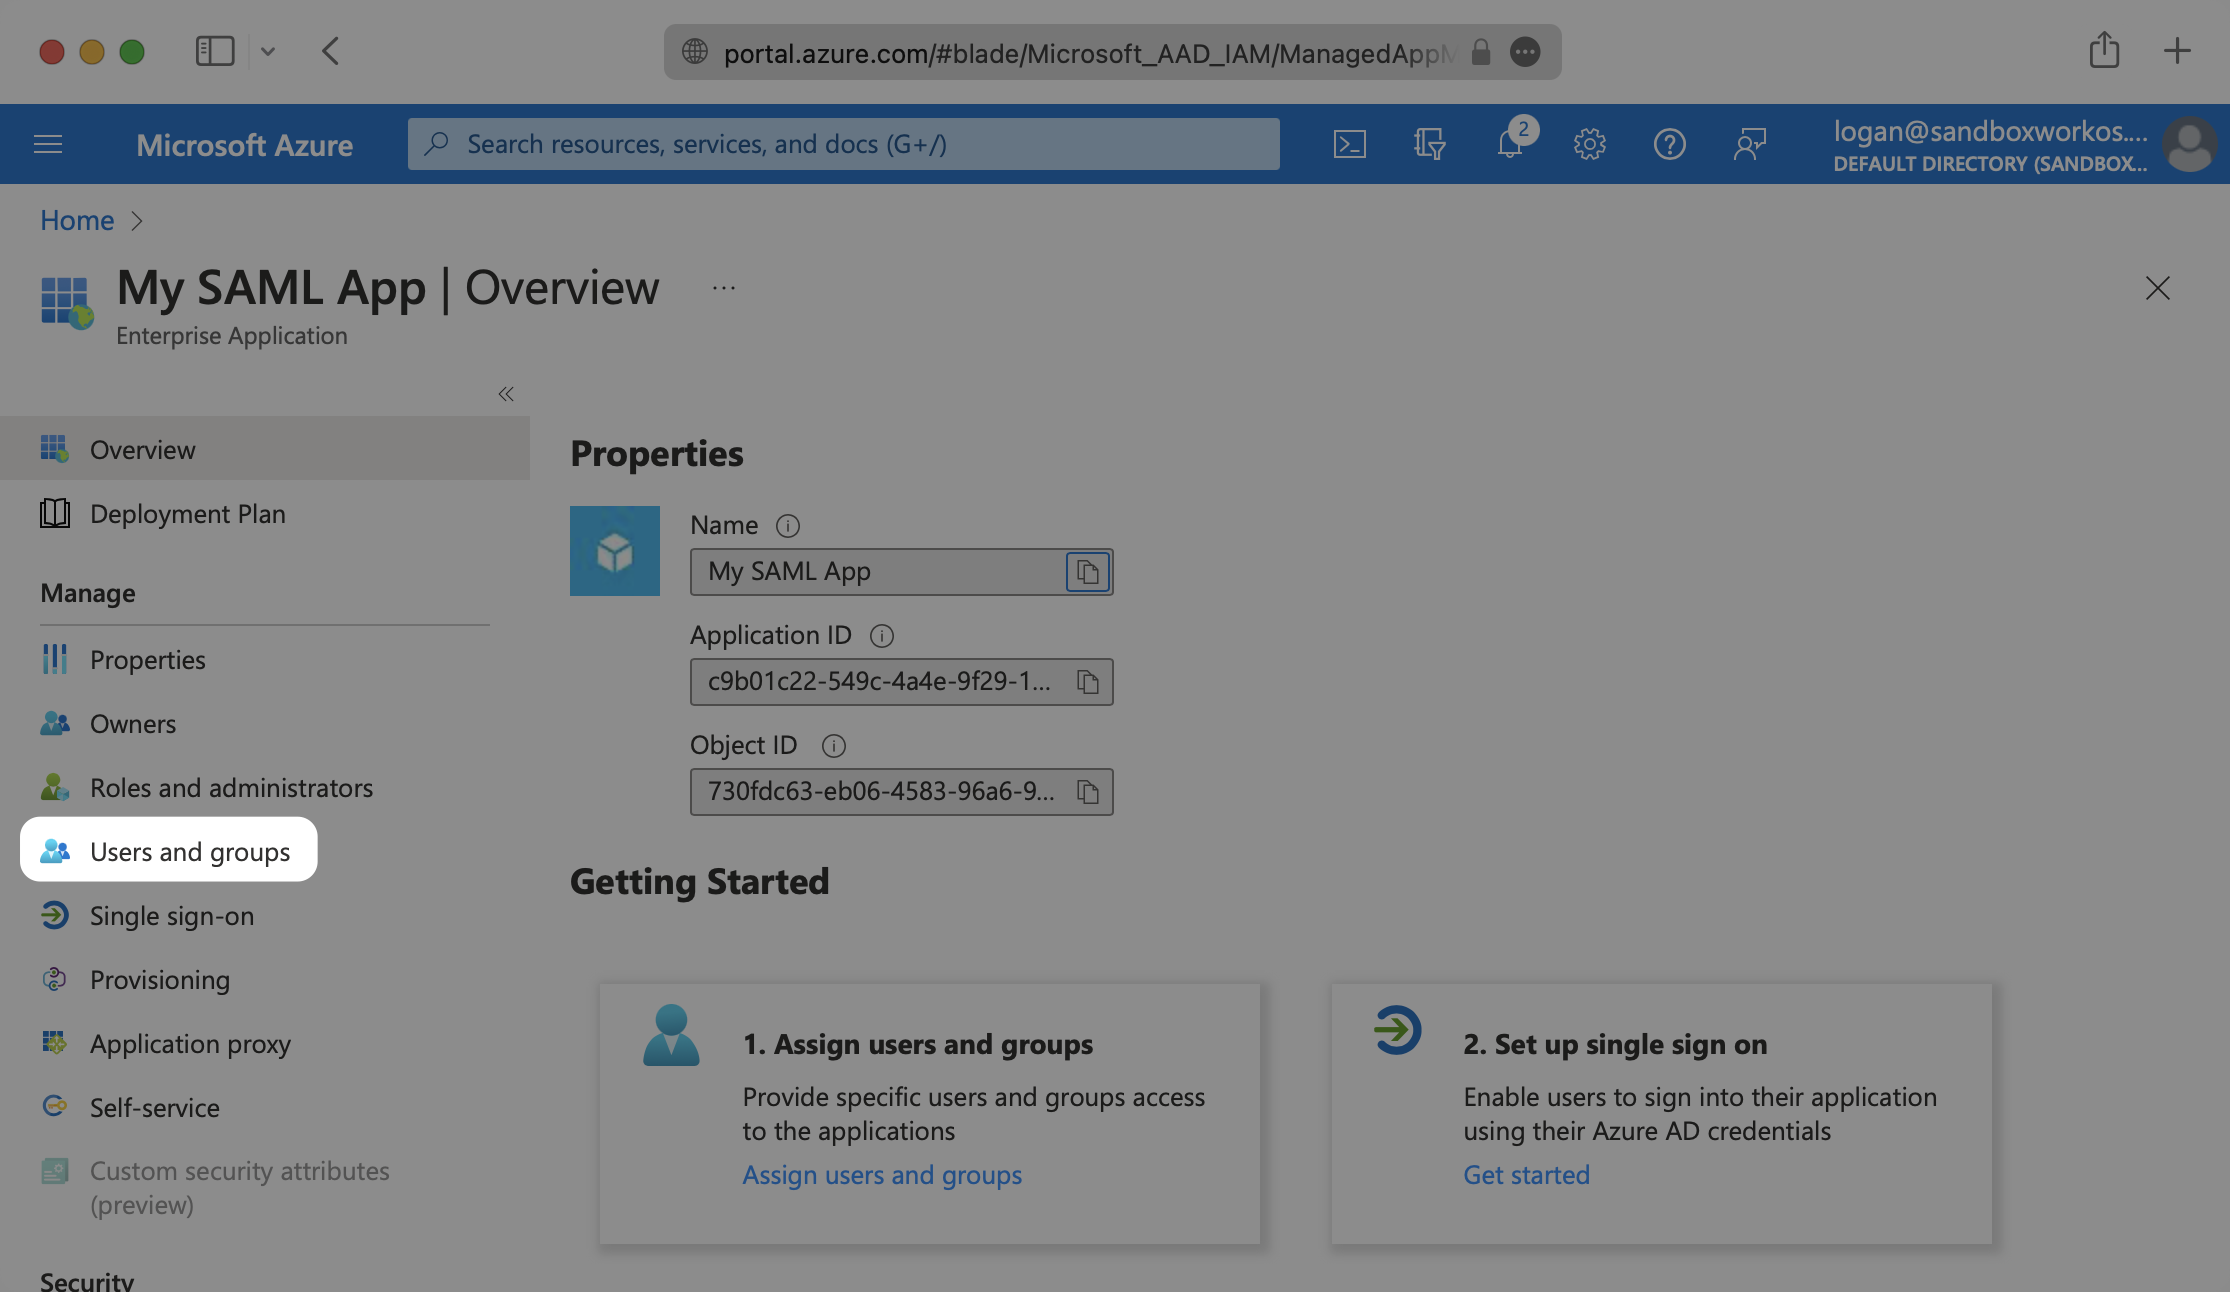 A screenshot showing where to select "Users and groups" in the Azure dashboard.